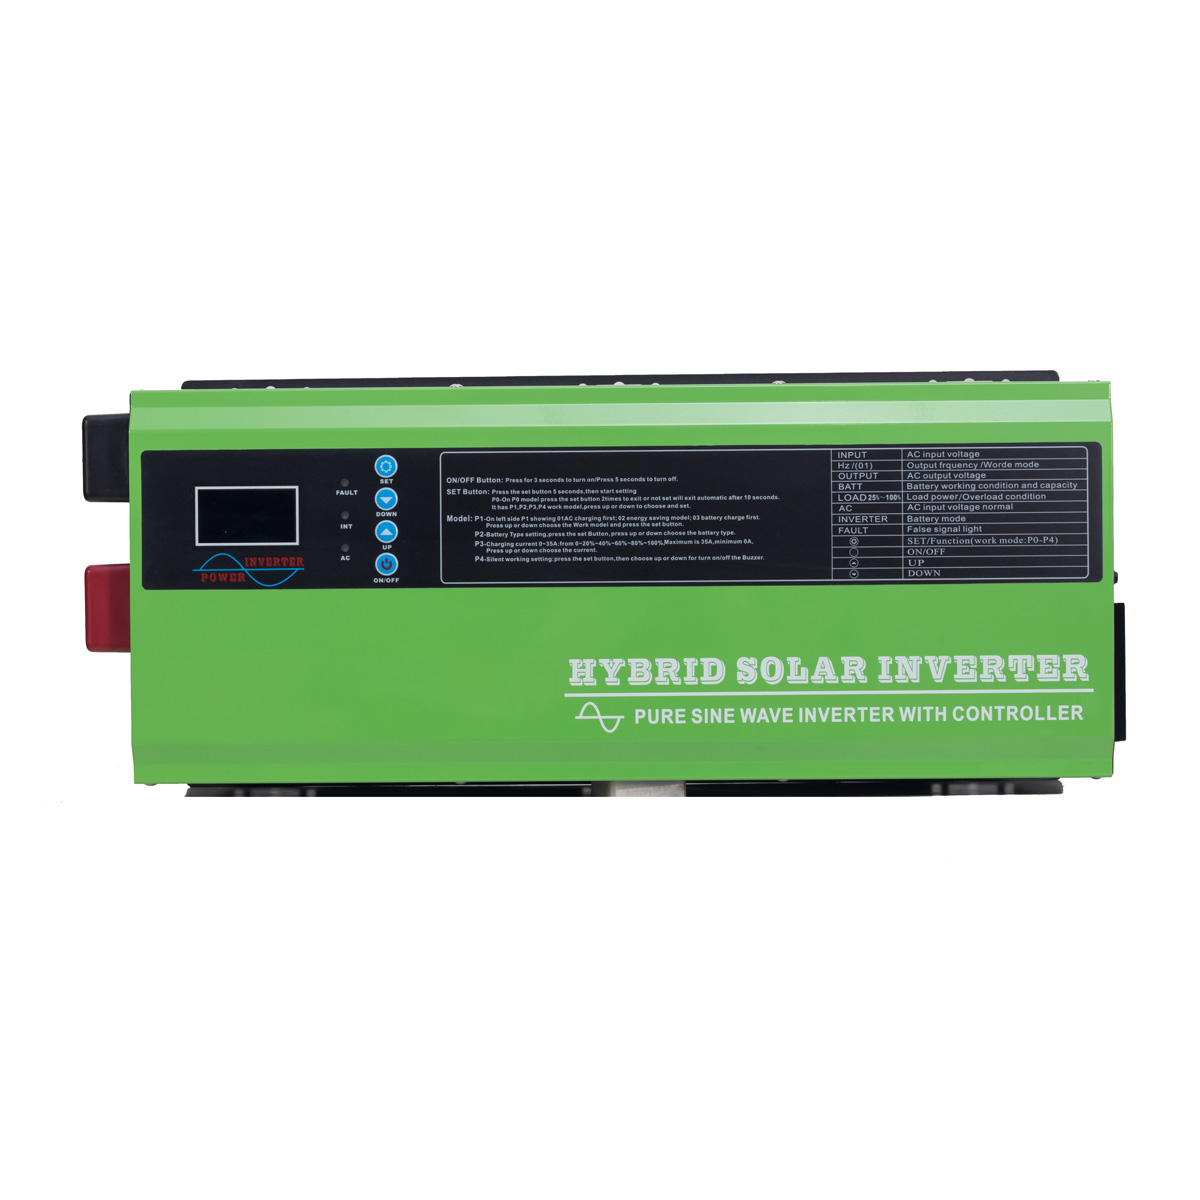 10000W high wattage power inverter for truck bed